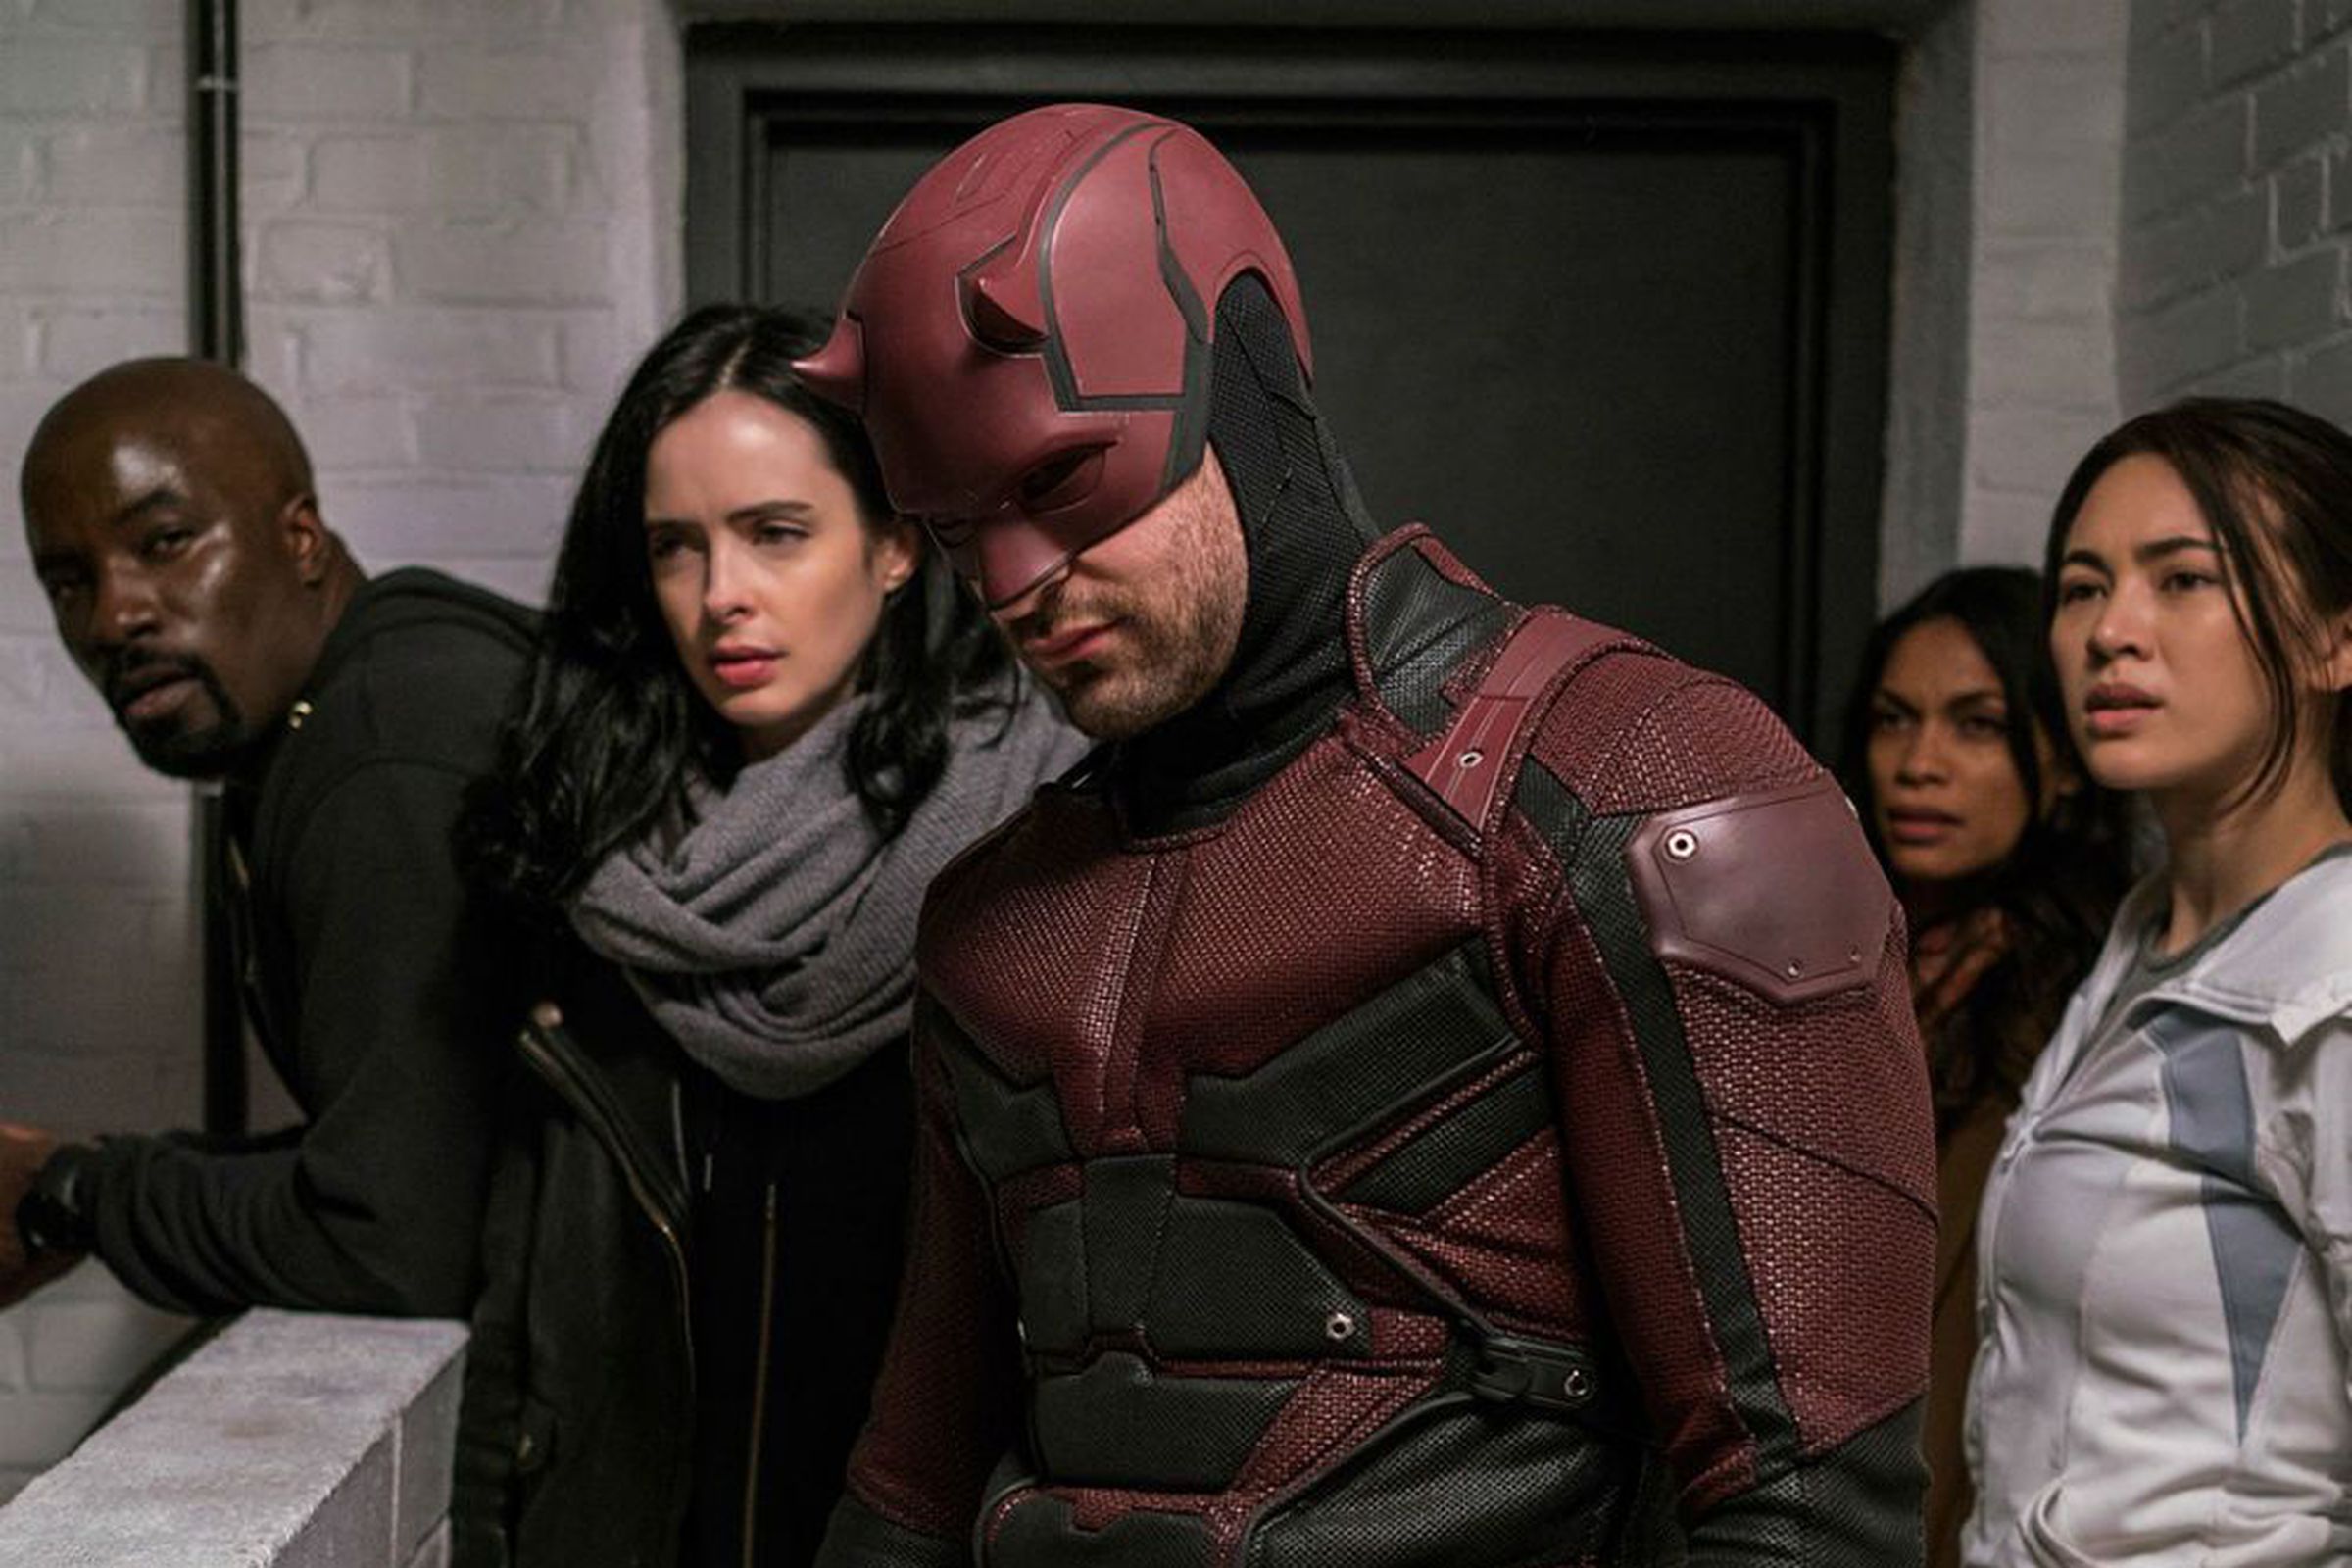 A man in an armored, red and black superhero suit including a helmet adorned in small devil horns. The man is flanked to his right by a bald man in a gray hoodie, a brunette woman wearing a leather jacket and a chunky scarf. To the man in red’s left by a woman in a black top, and another woman in a white jacket.